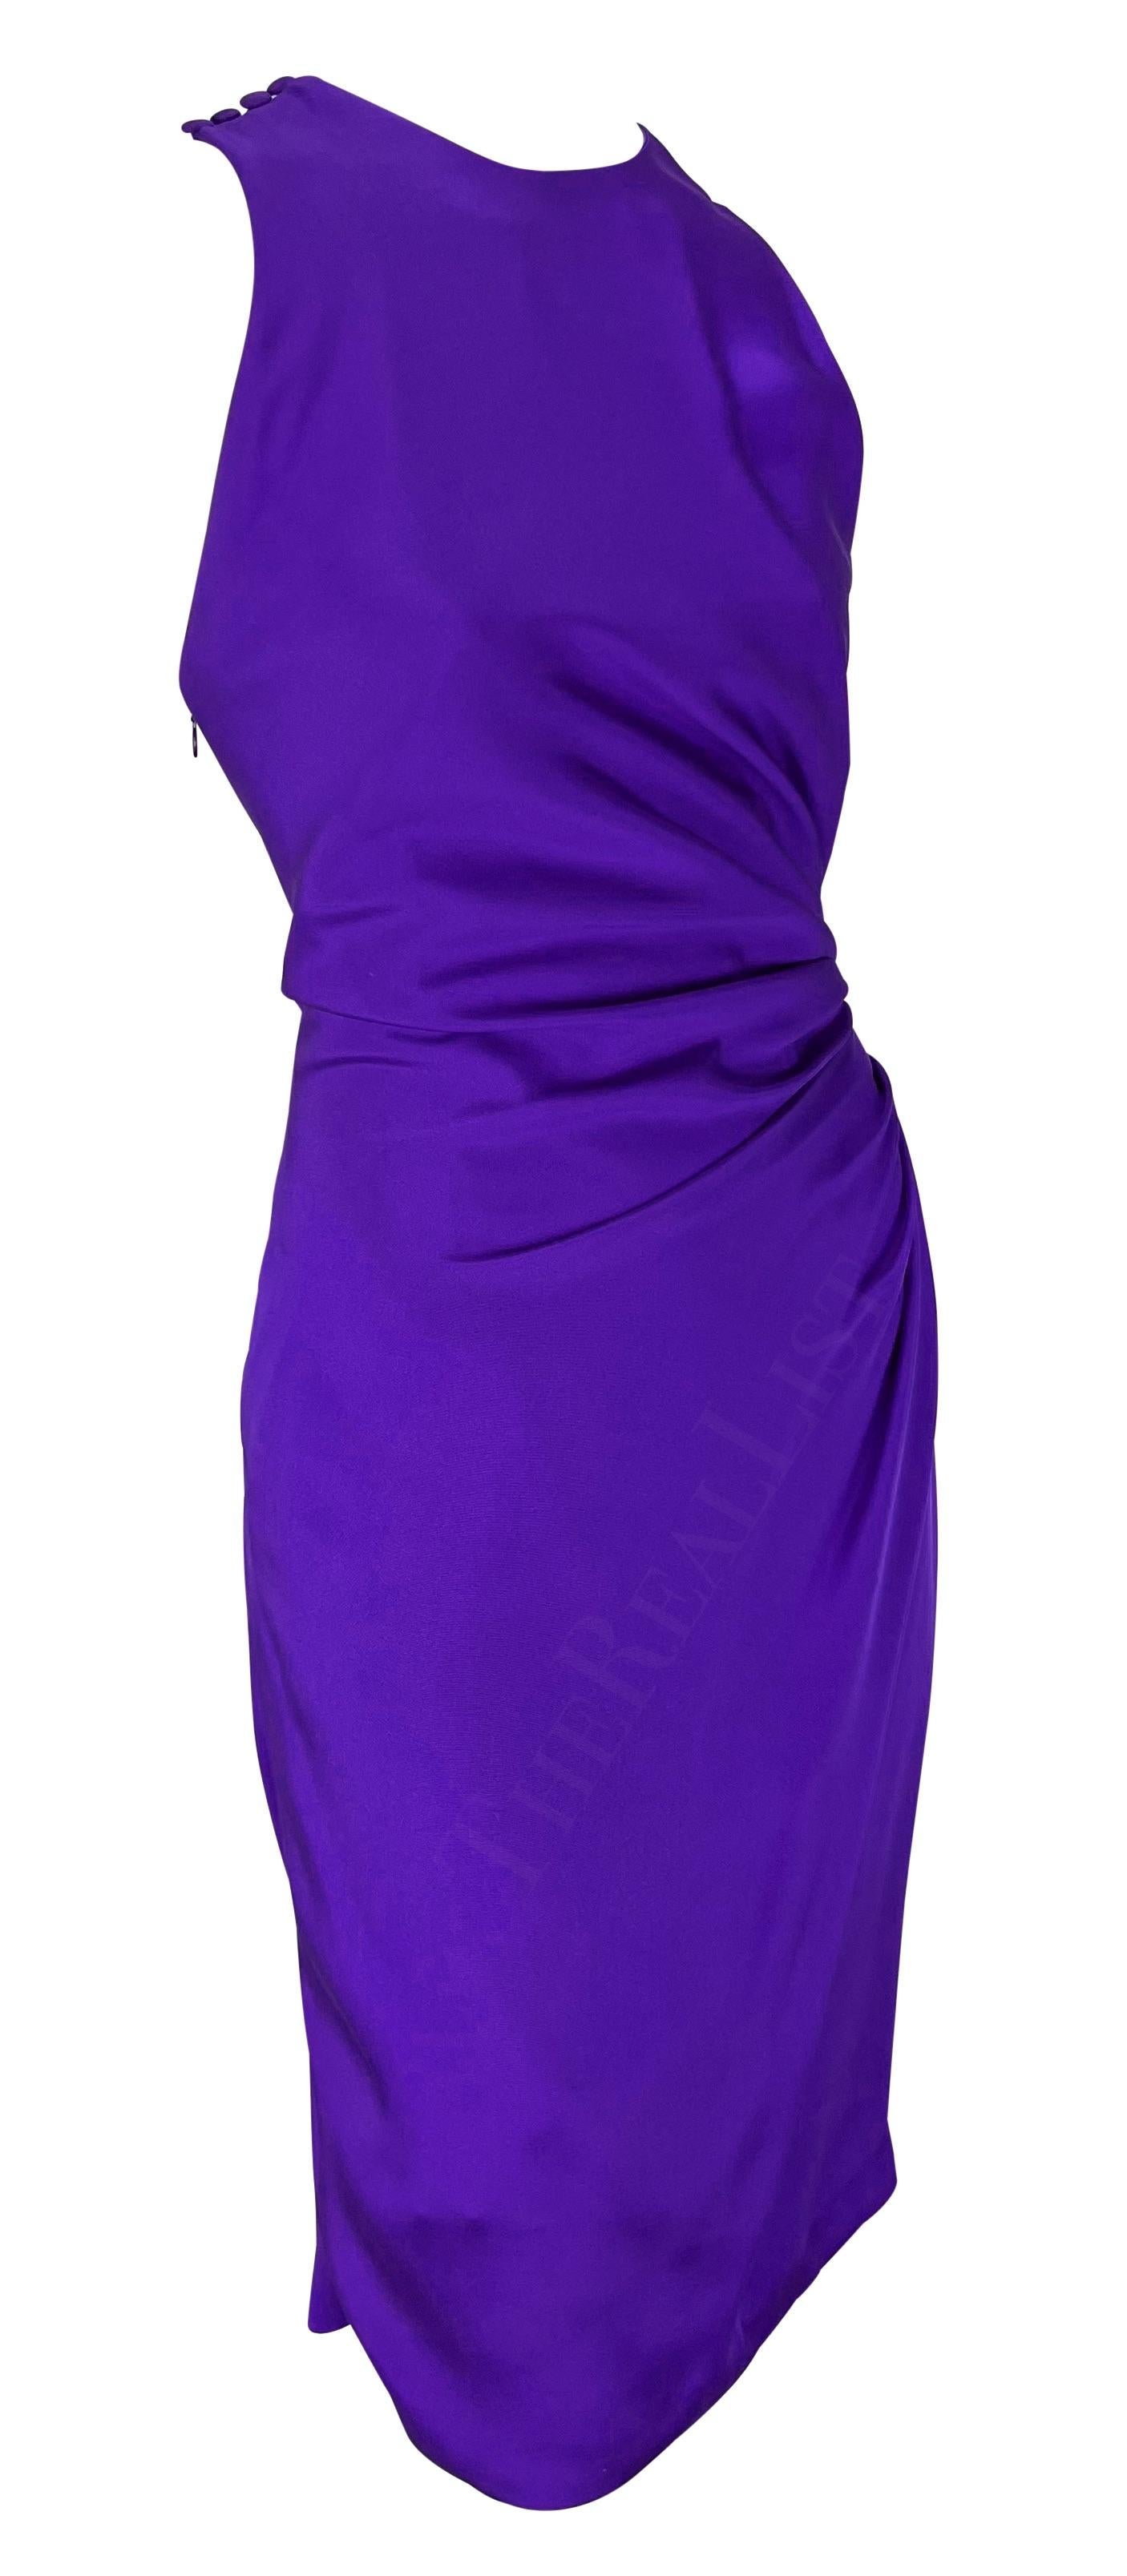 S/S 1991 Gianni Versace Purple Gathered Ruched Sleeveless Cocktail Dress For Sale 2